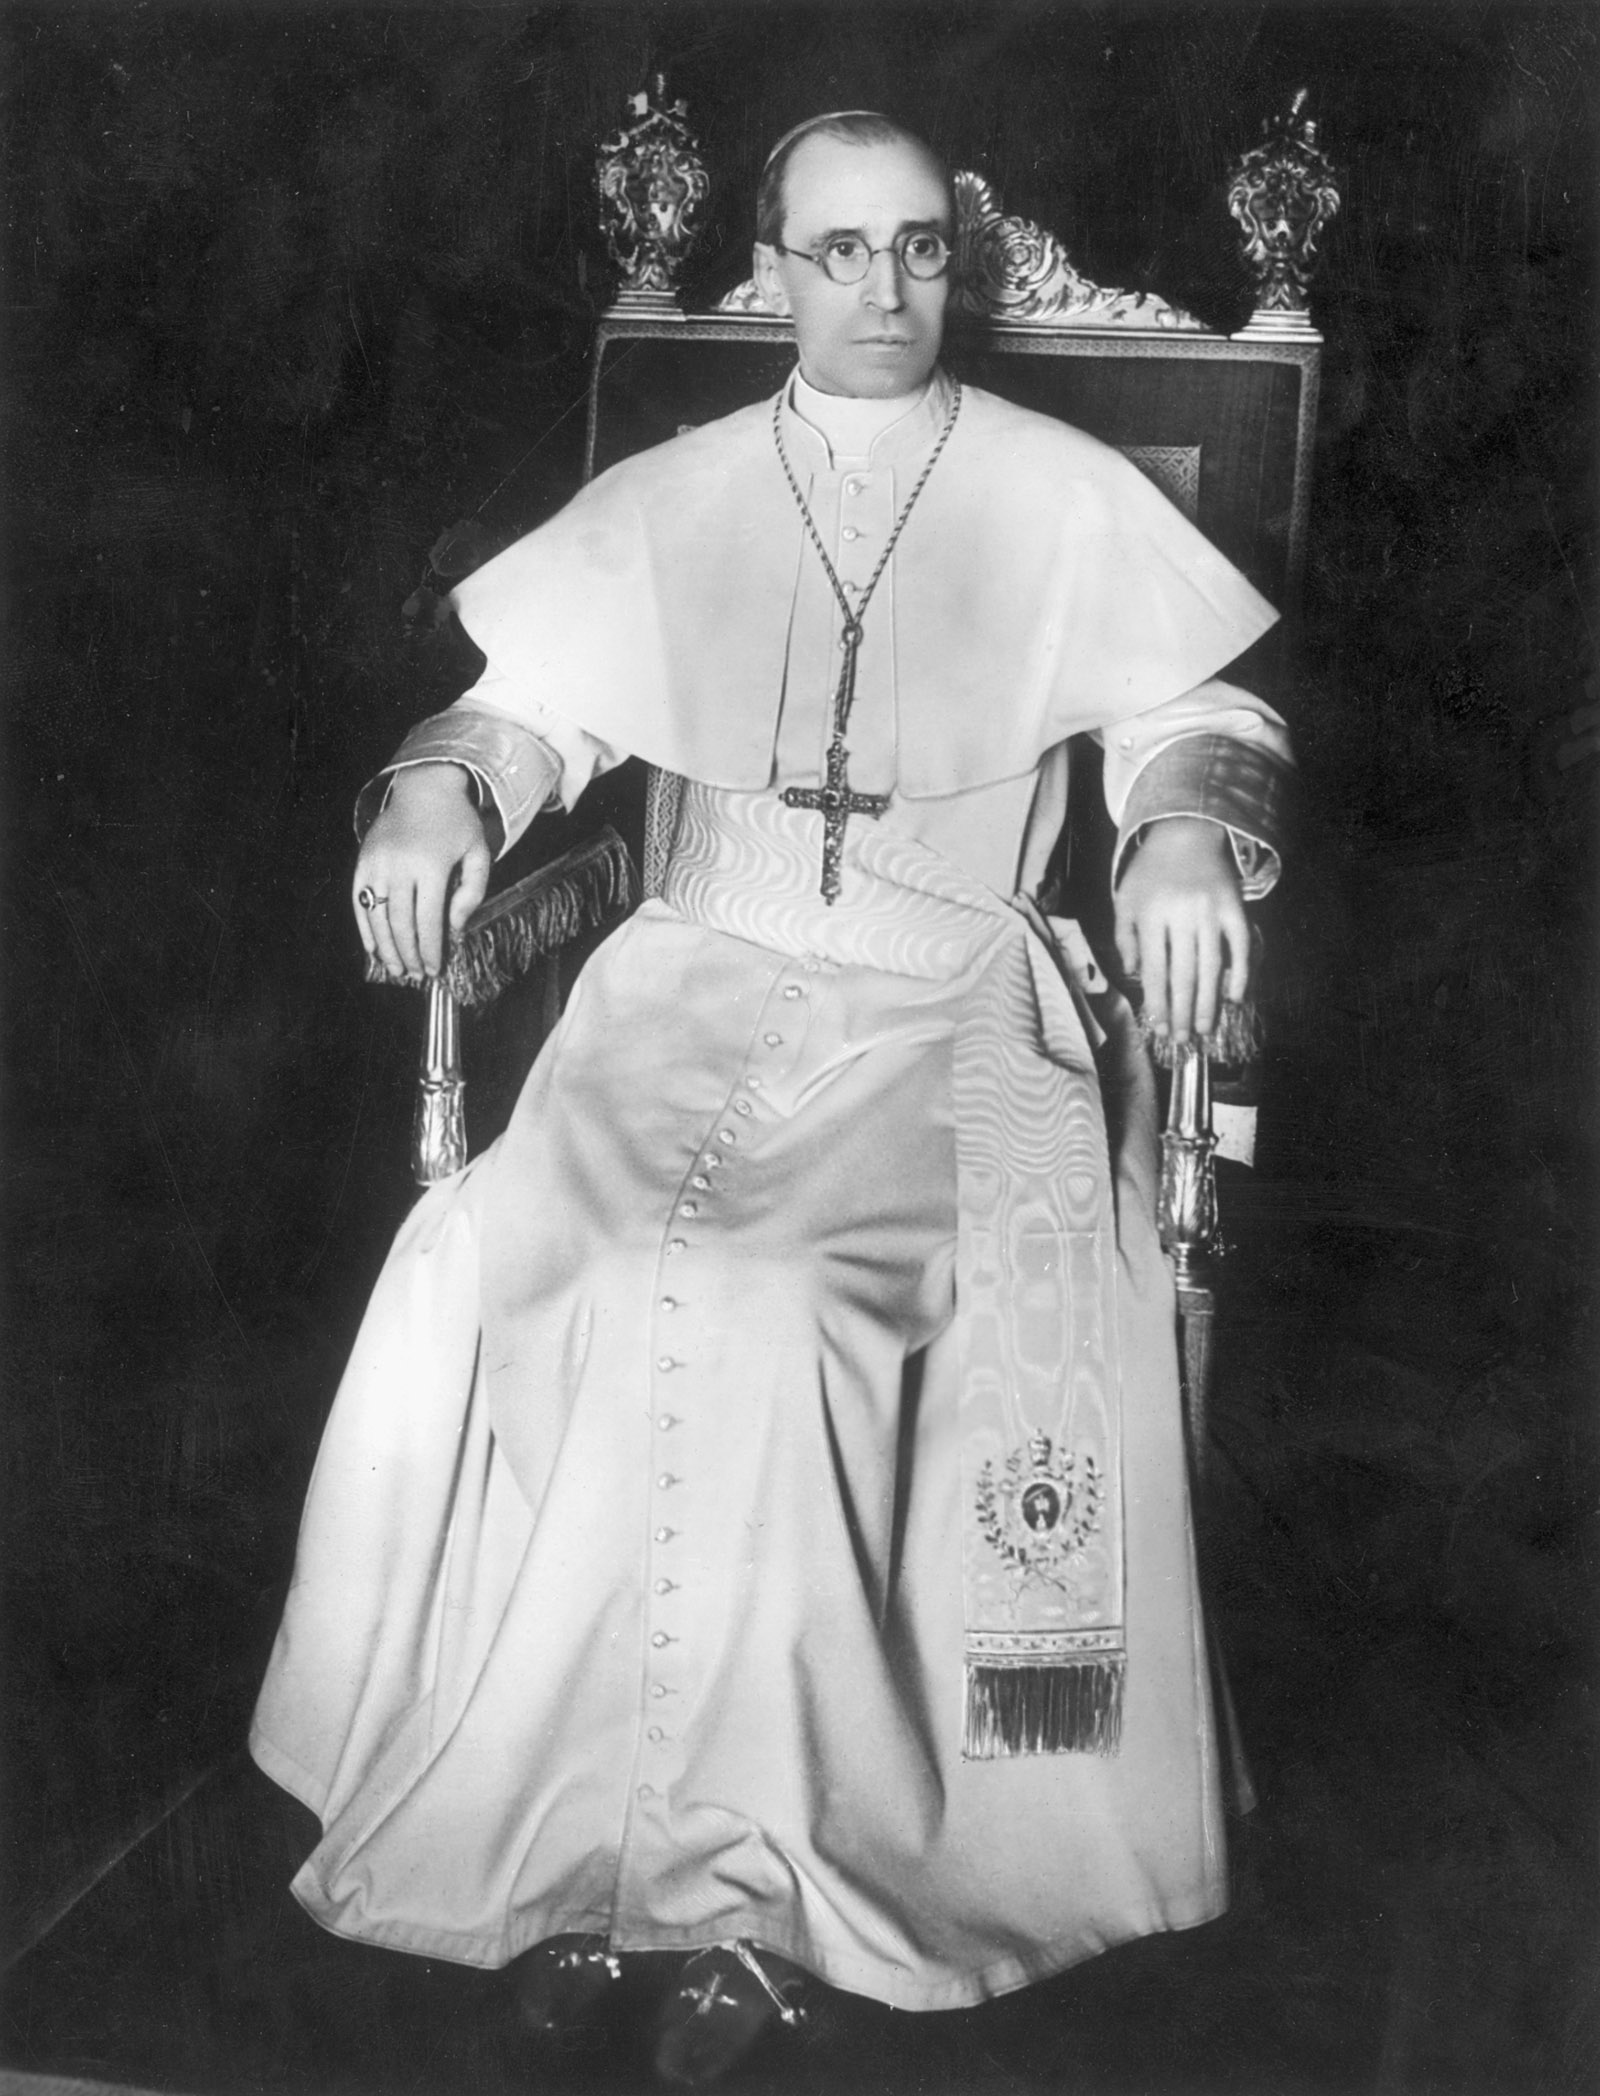 The Pius XII: An | Michael Hesemann | The New York Review of Books